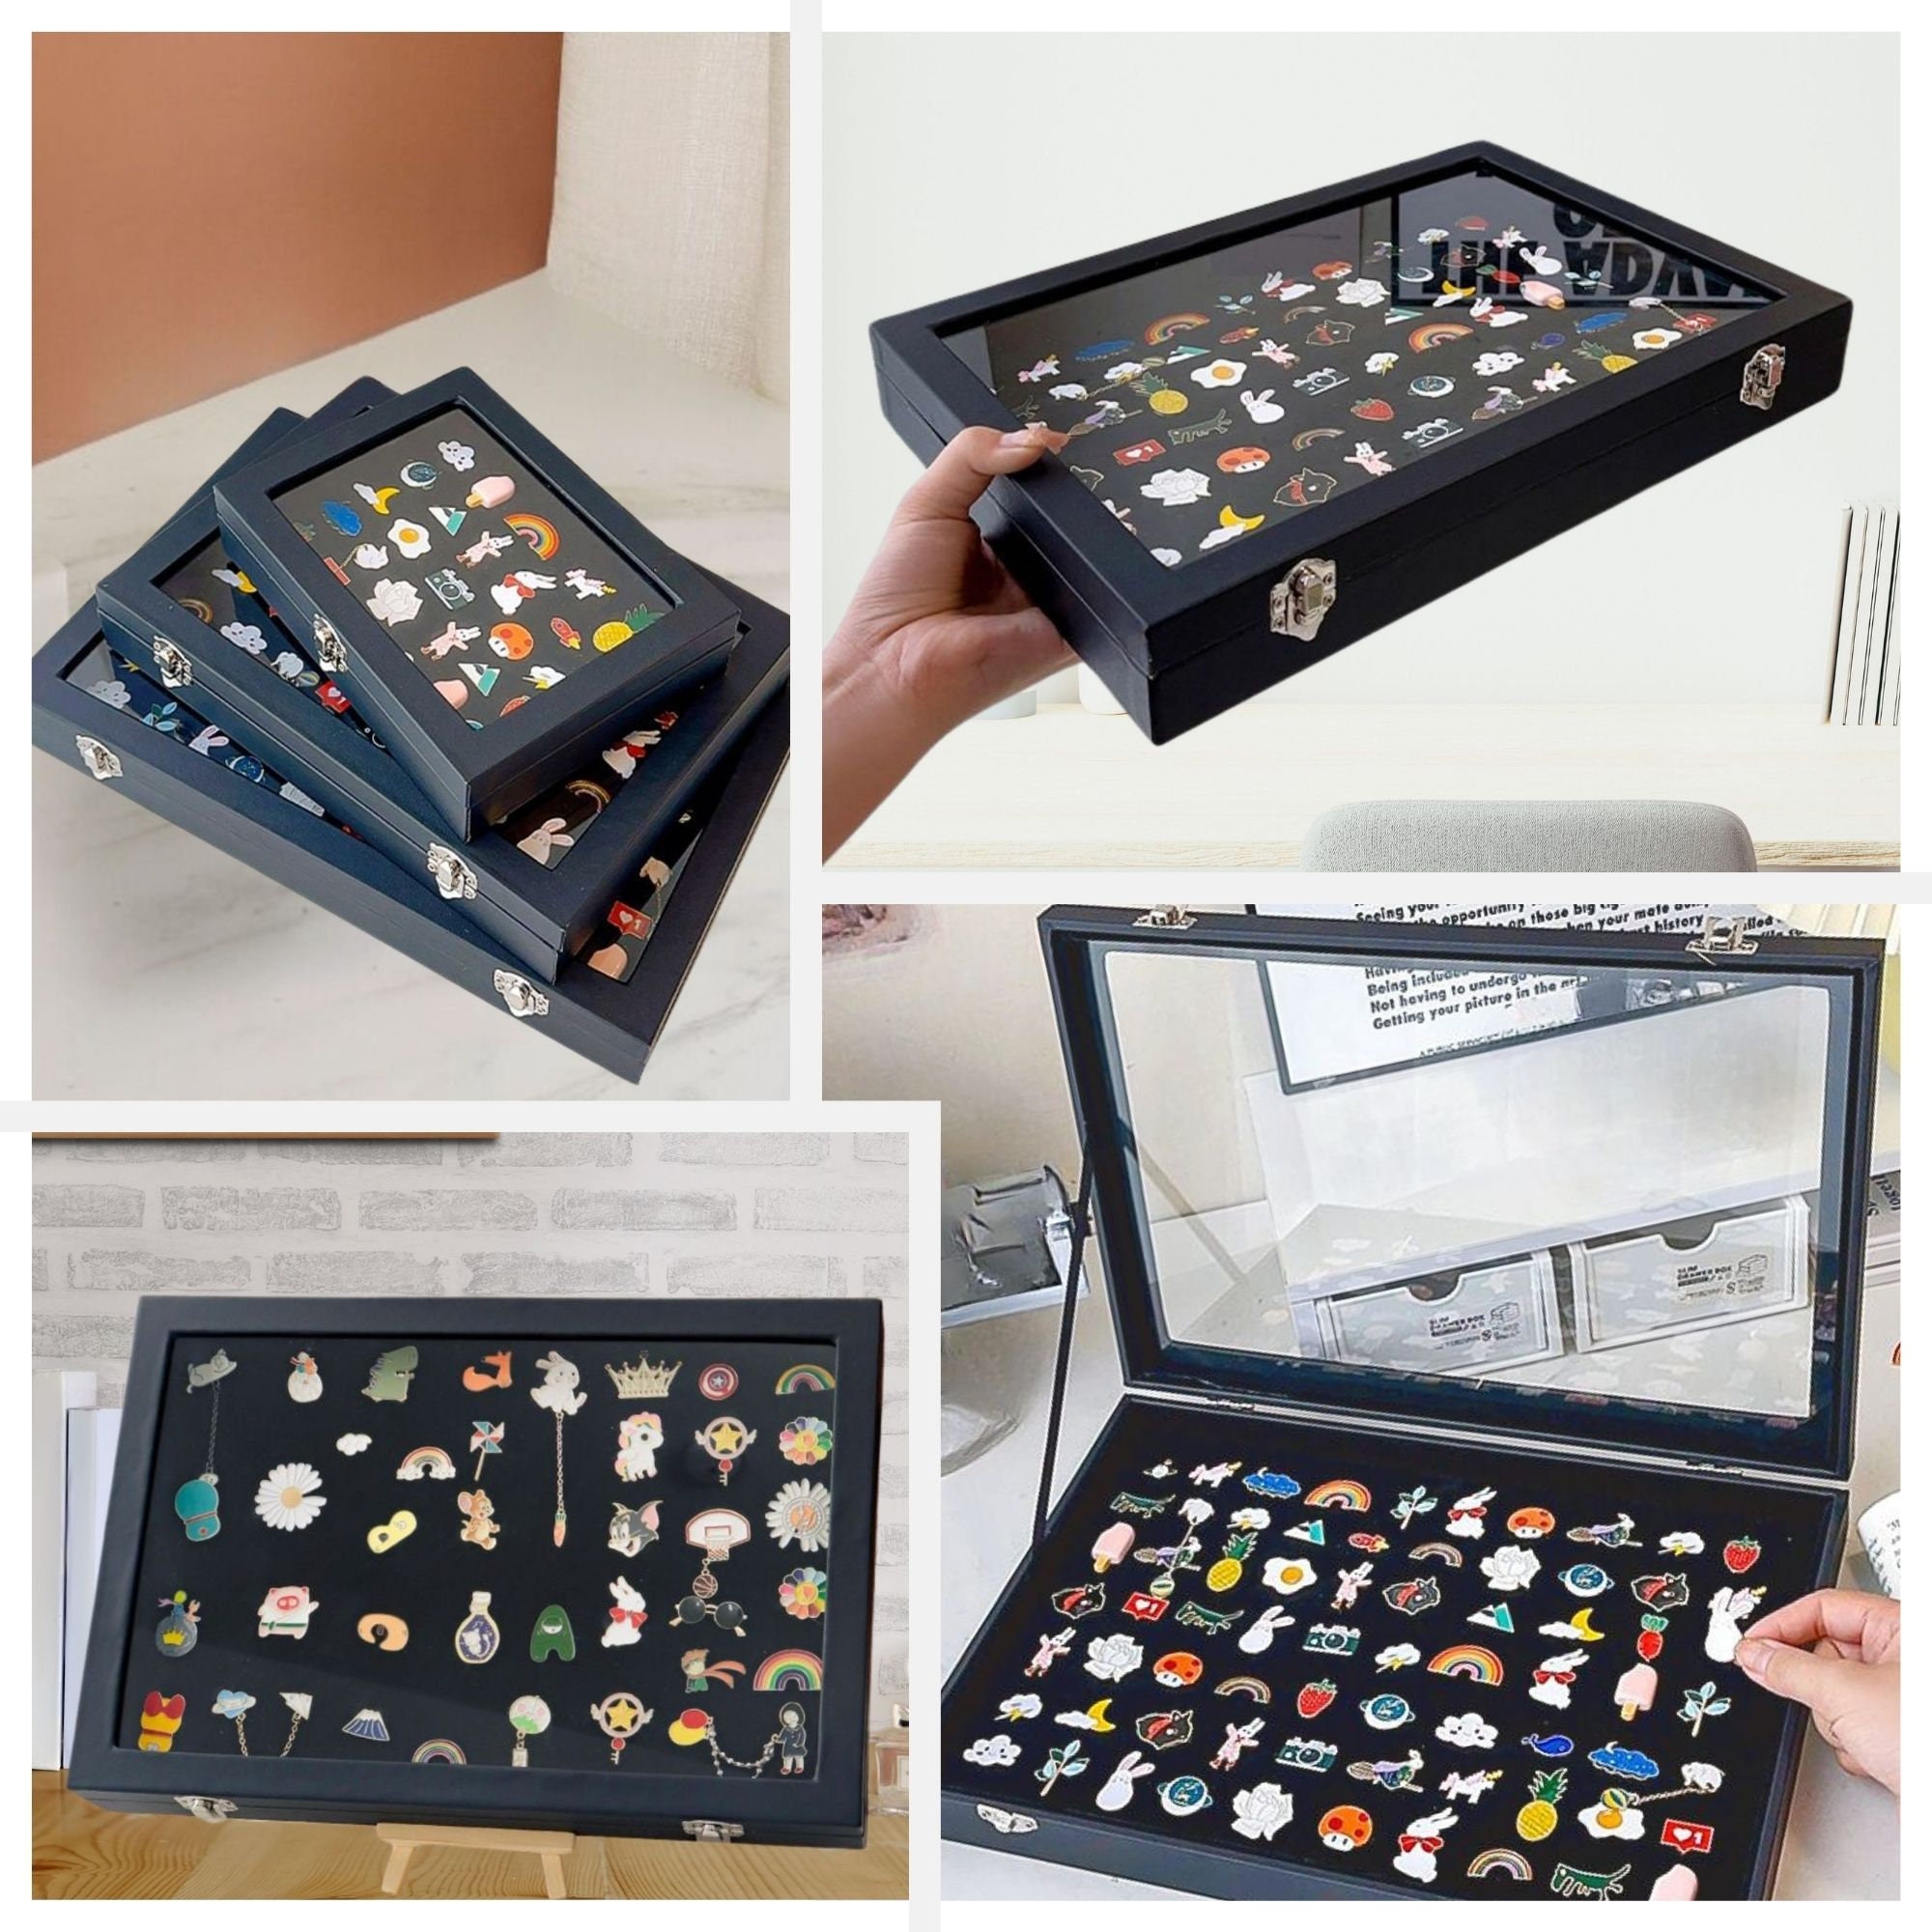 Enamel Pin Display Pages Pin Carrying Case, Pins Collection Storage  Organizer Case, Travel Brooch Pin Display Bag (Pins Not Included)